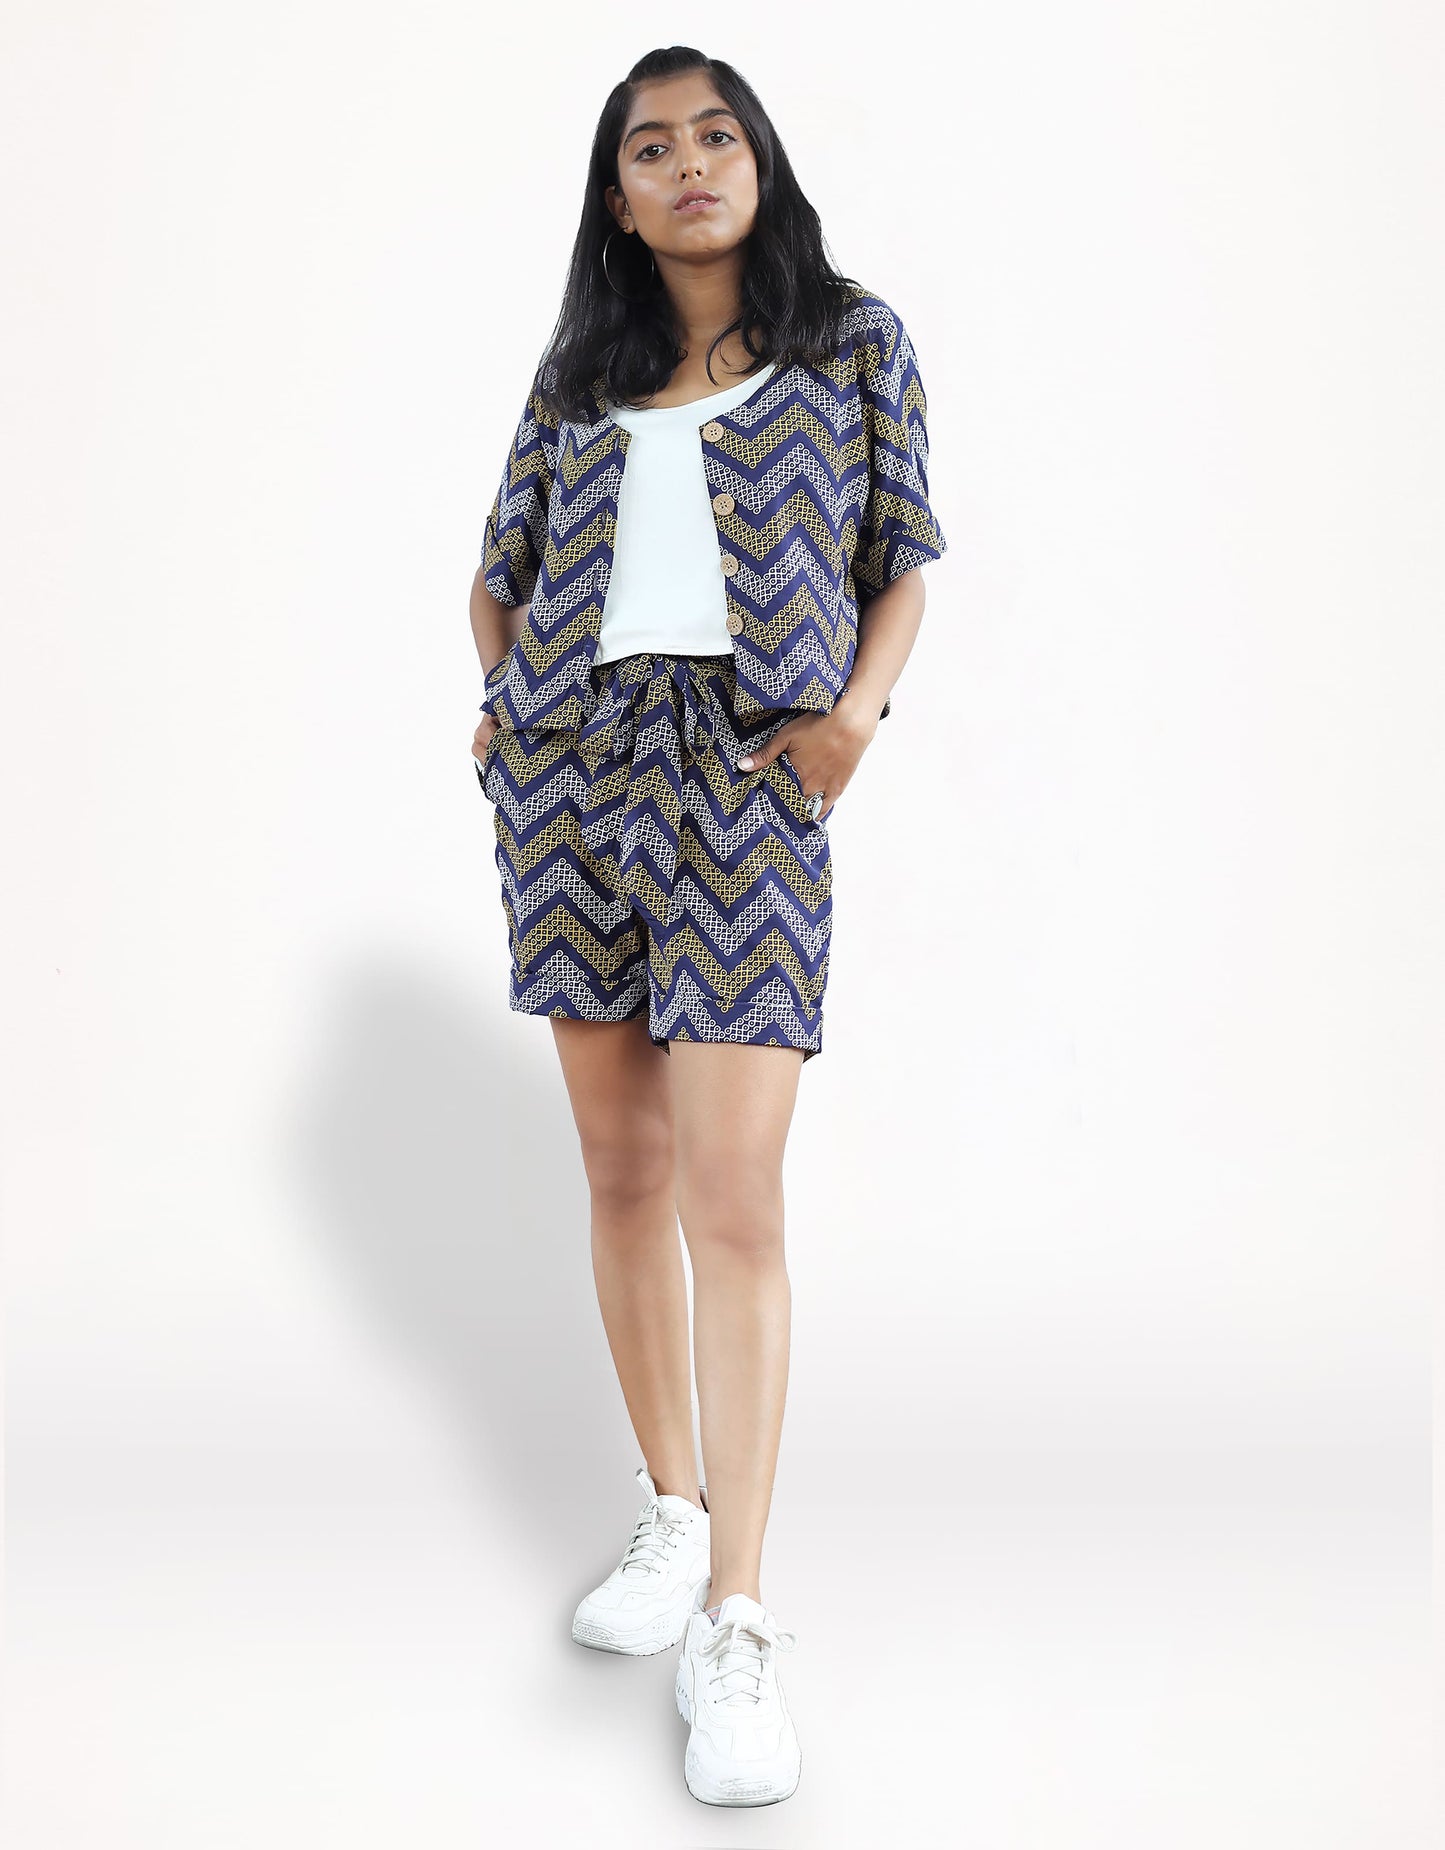 Front view of Hueloom's detachable romper in navy kolam print with ensemble.